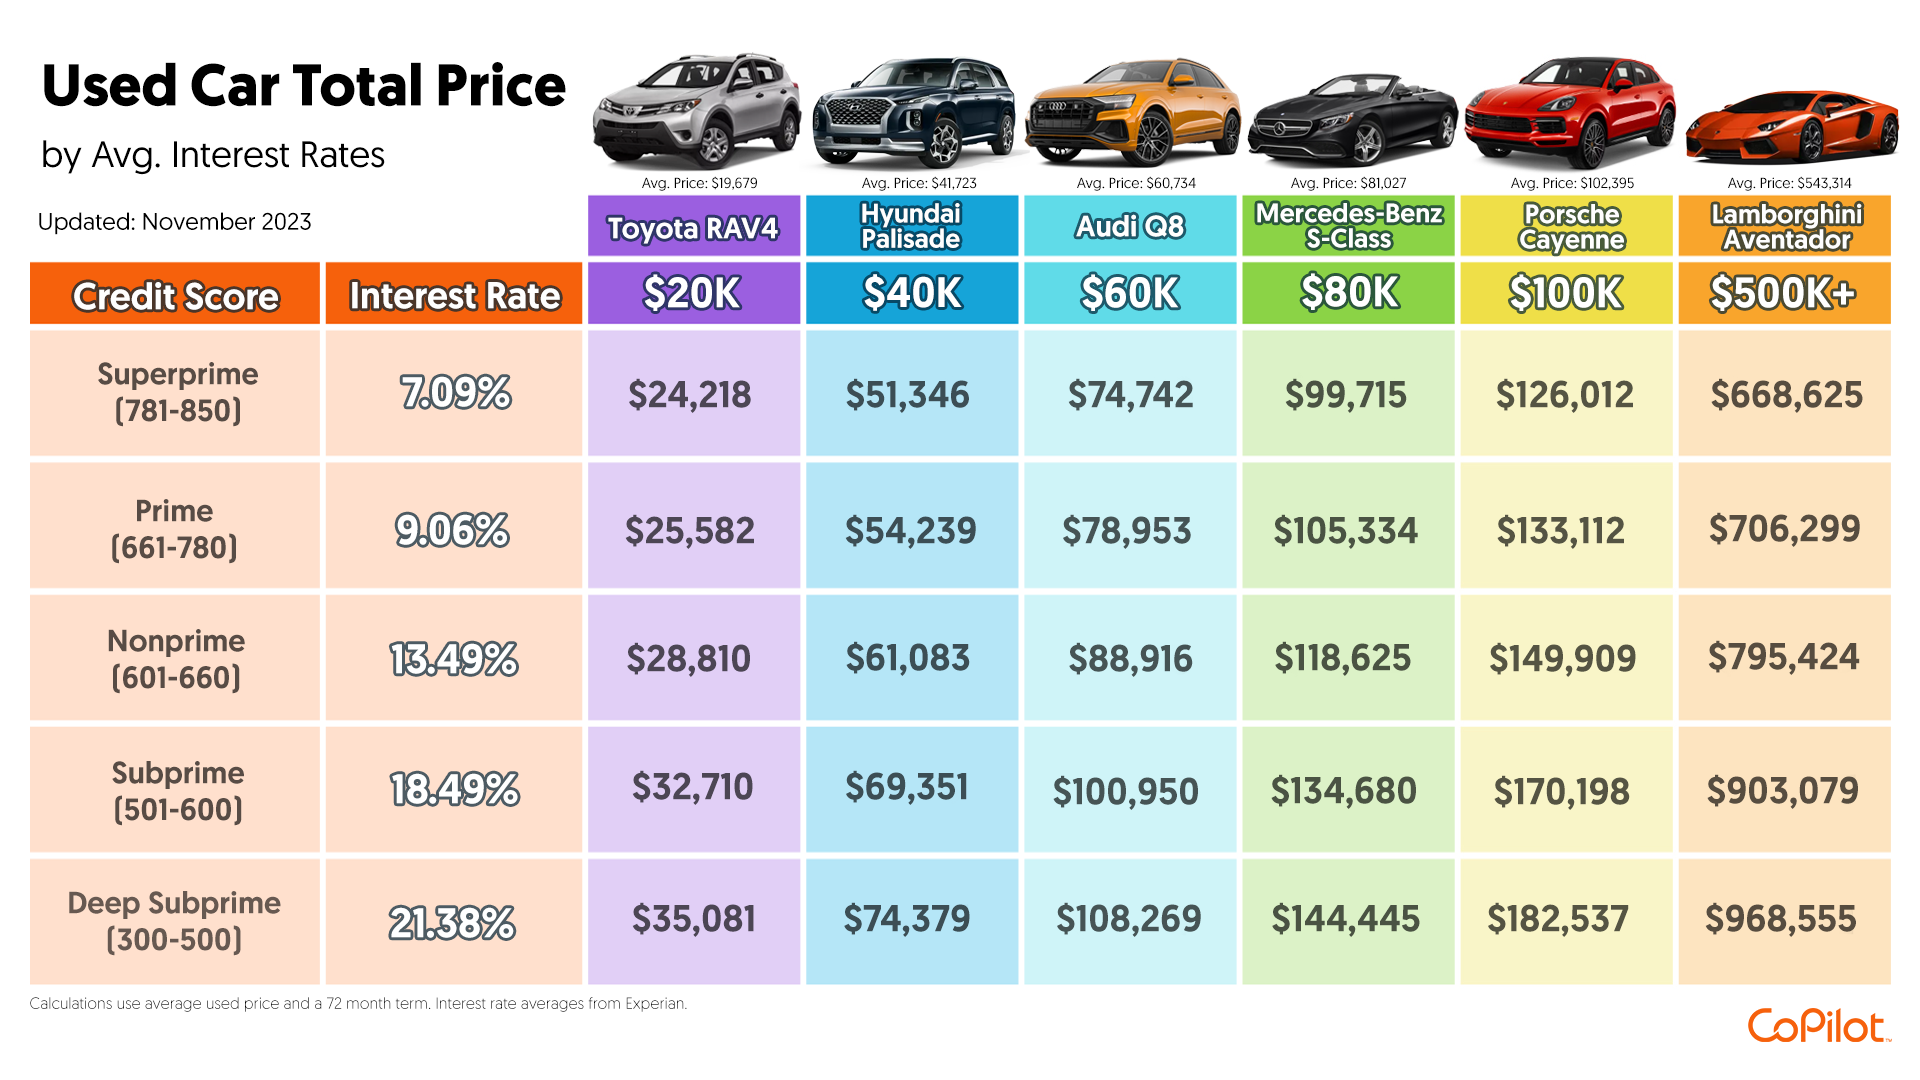 A chart of Used Car Total Prices across six different models